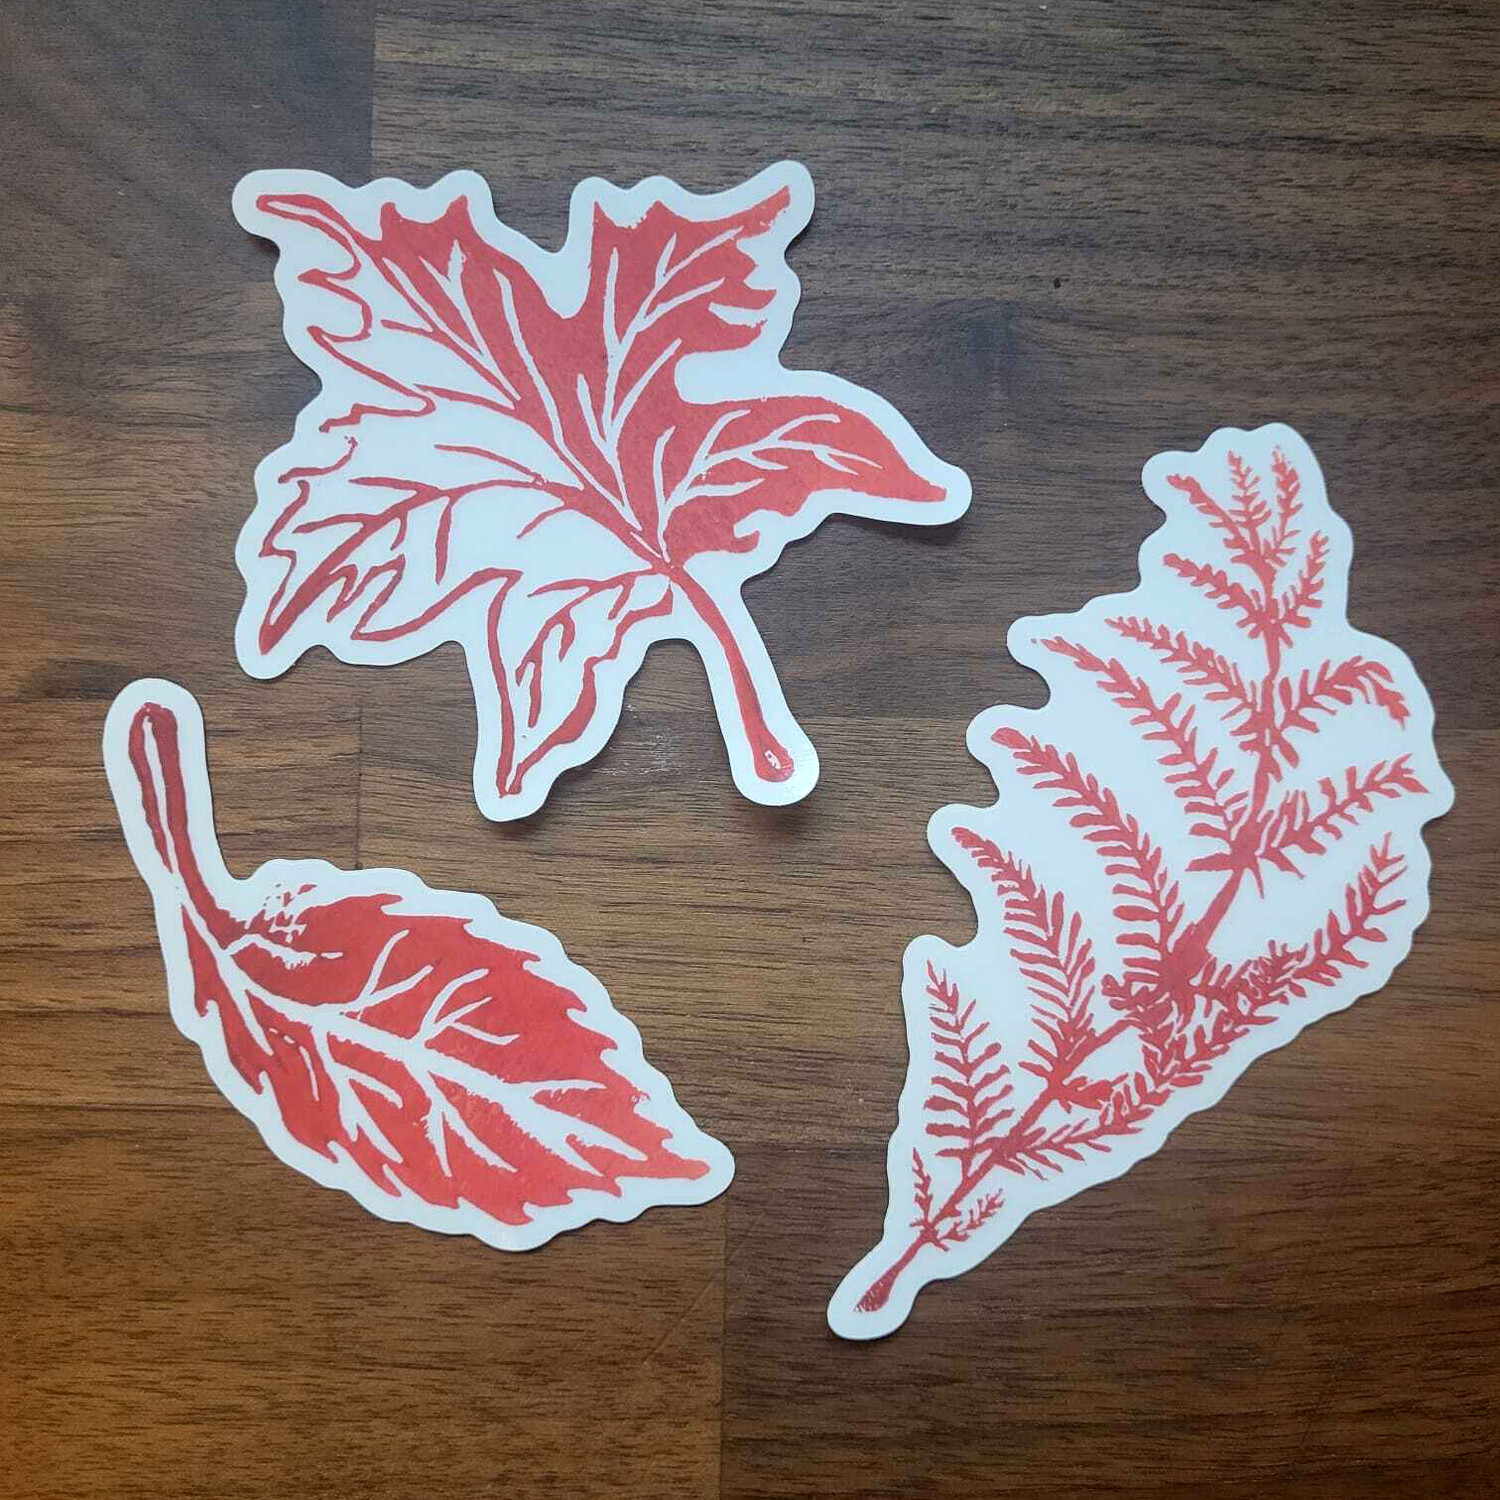 Fall Leaves Sticker Pack - Stickers by RJ